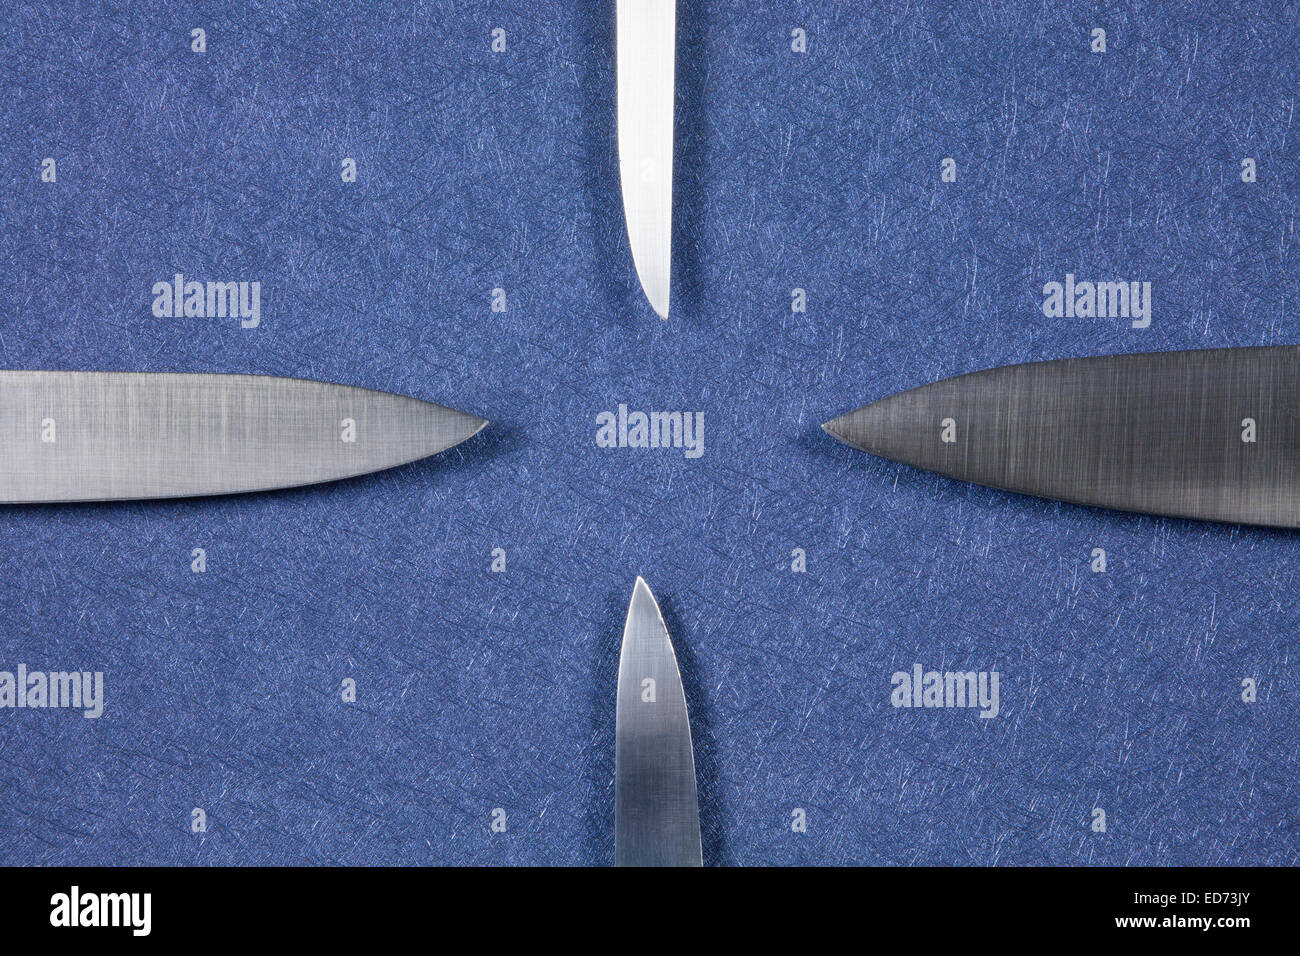 four big kitchen knife bright silver blades on blue background Stock Photo